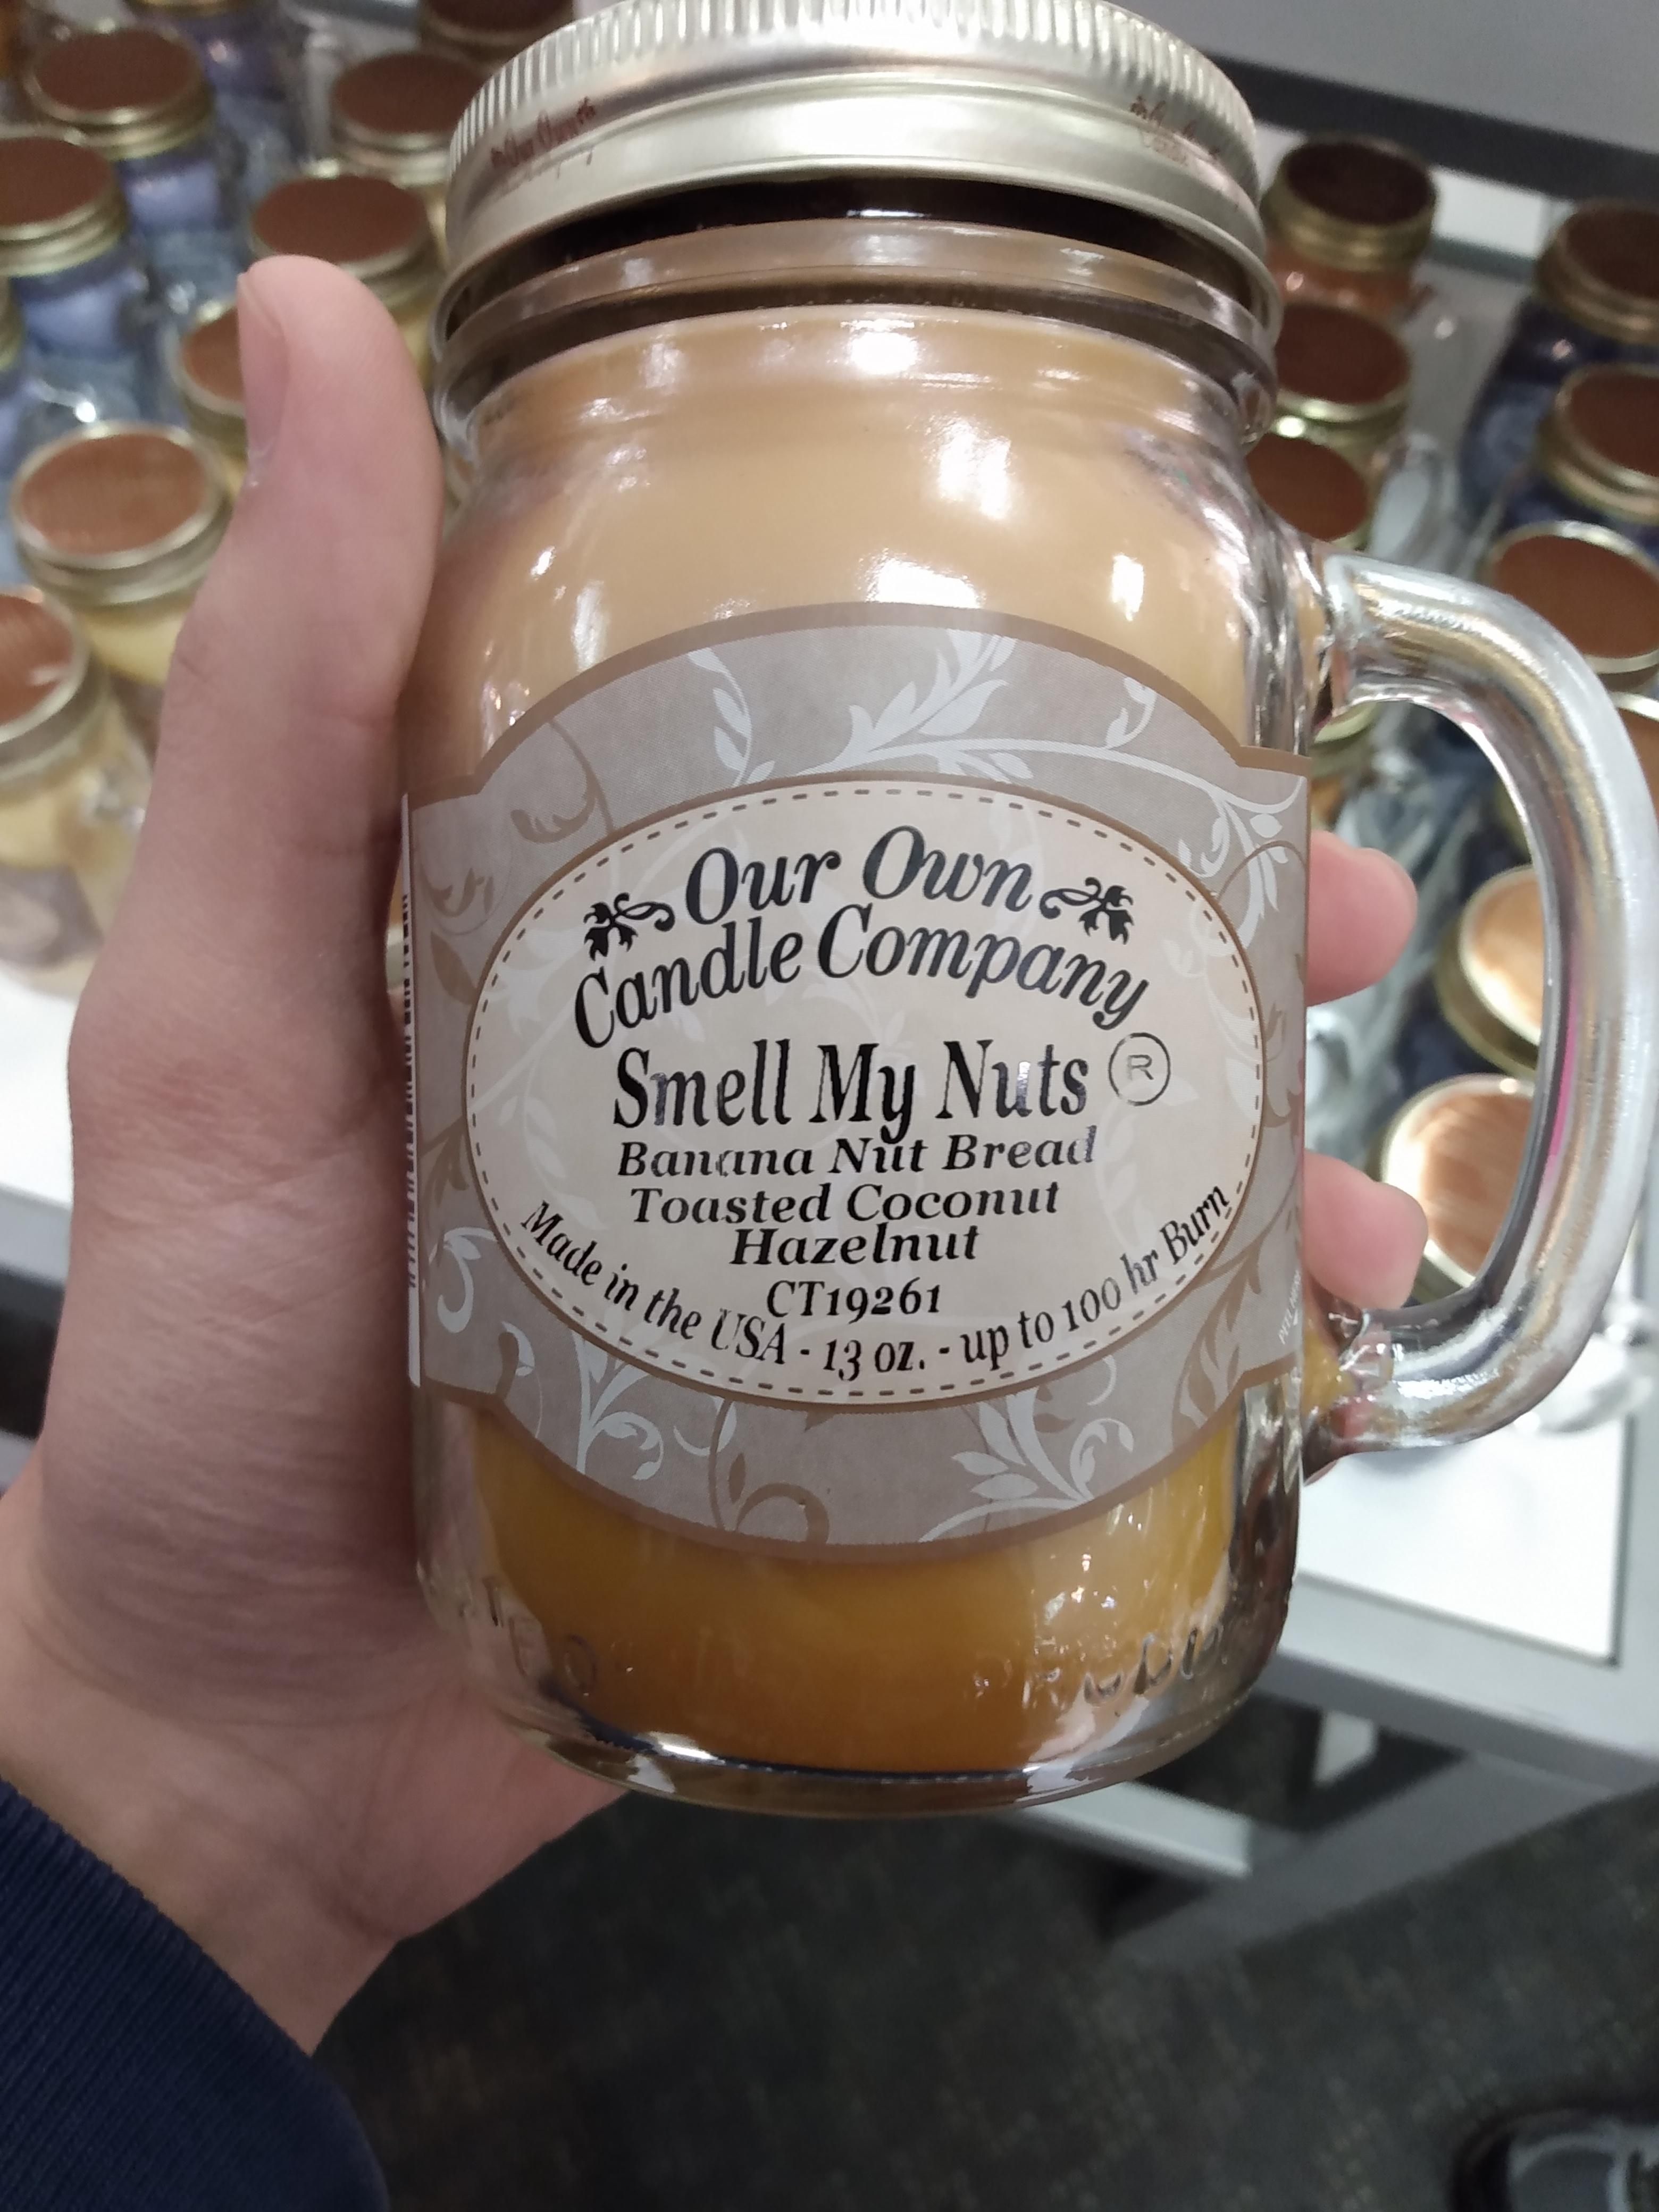 The name of this candle.